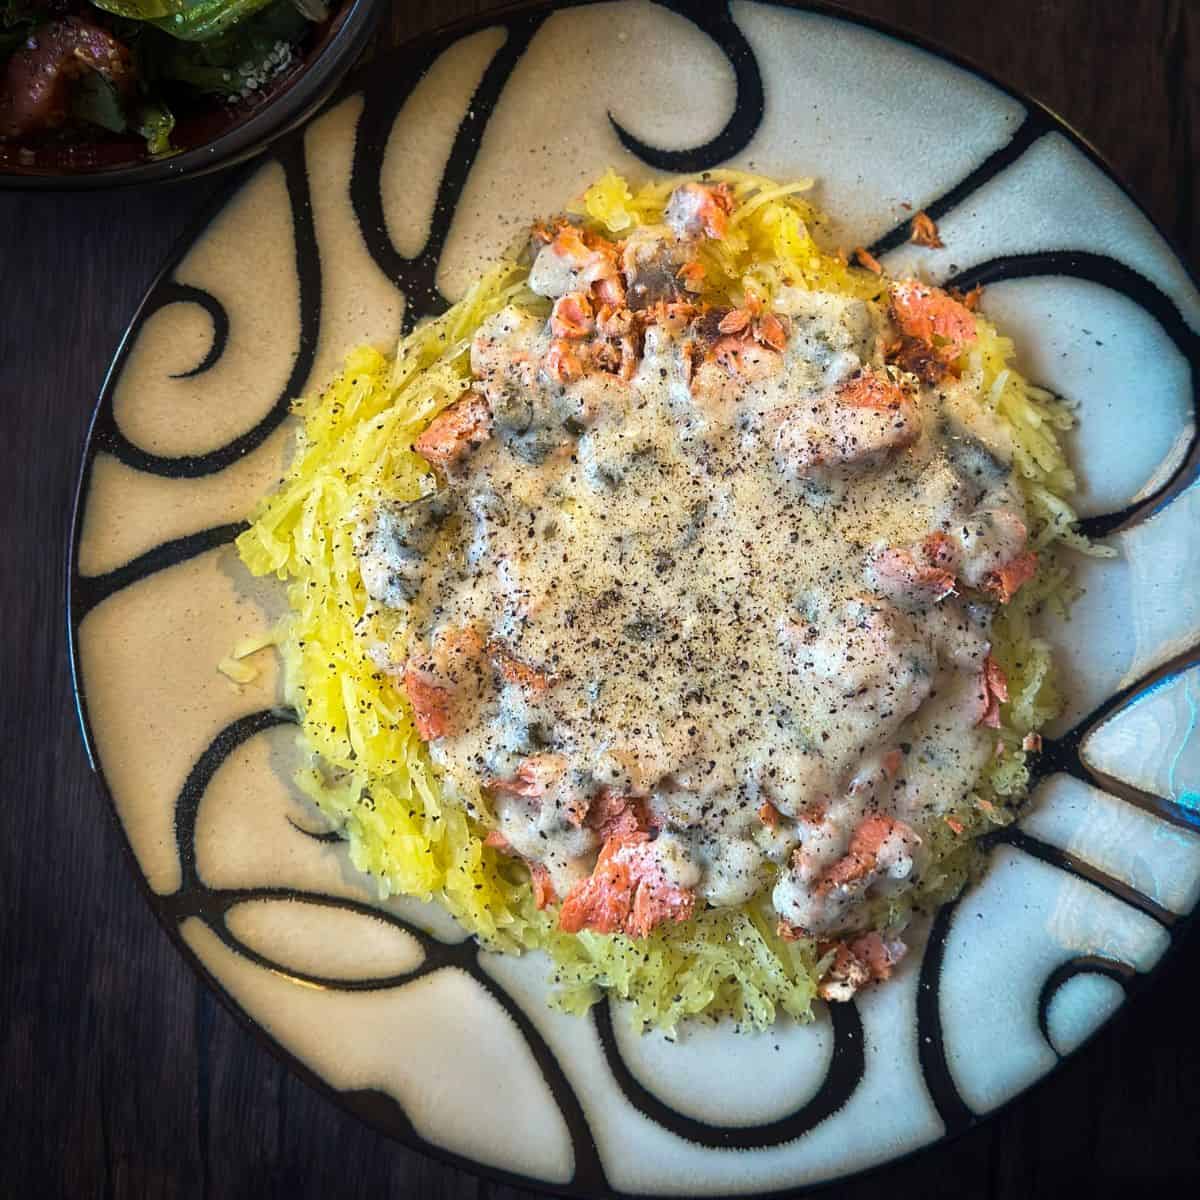 A darkened photo of a decorative plate of spaghetti squash topped with salmon chunks and creamy cajun alfredo sauce, seasoned with black pepper. A bowl of salad is visible in the top left corner.